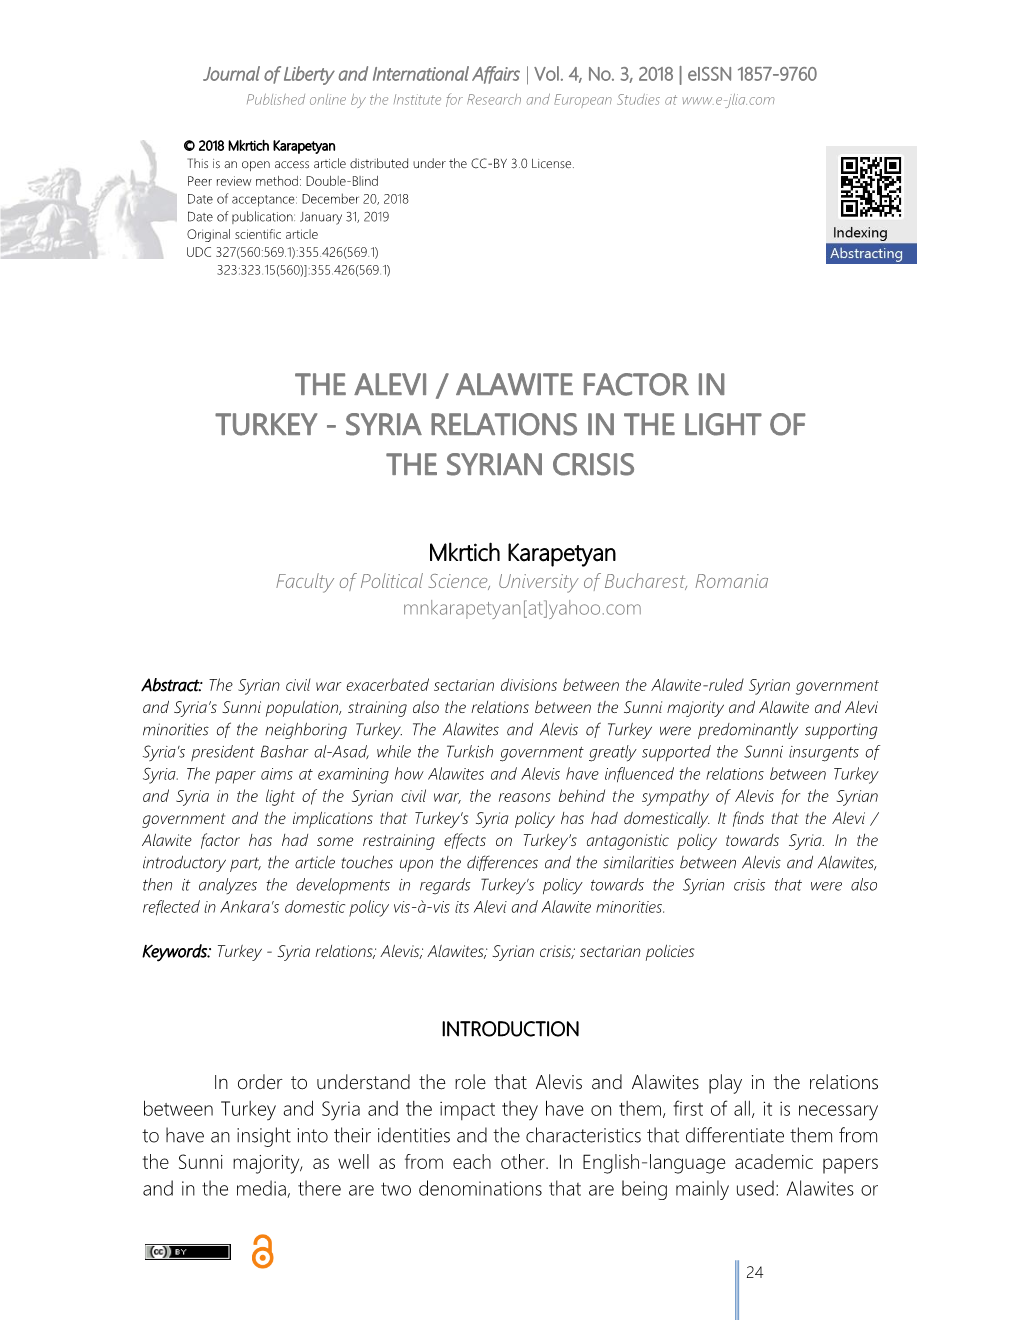 The Alevi / Alawite Factor in Turkey - Syria Relations in the Light of the Syrian Crisis